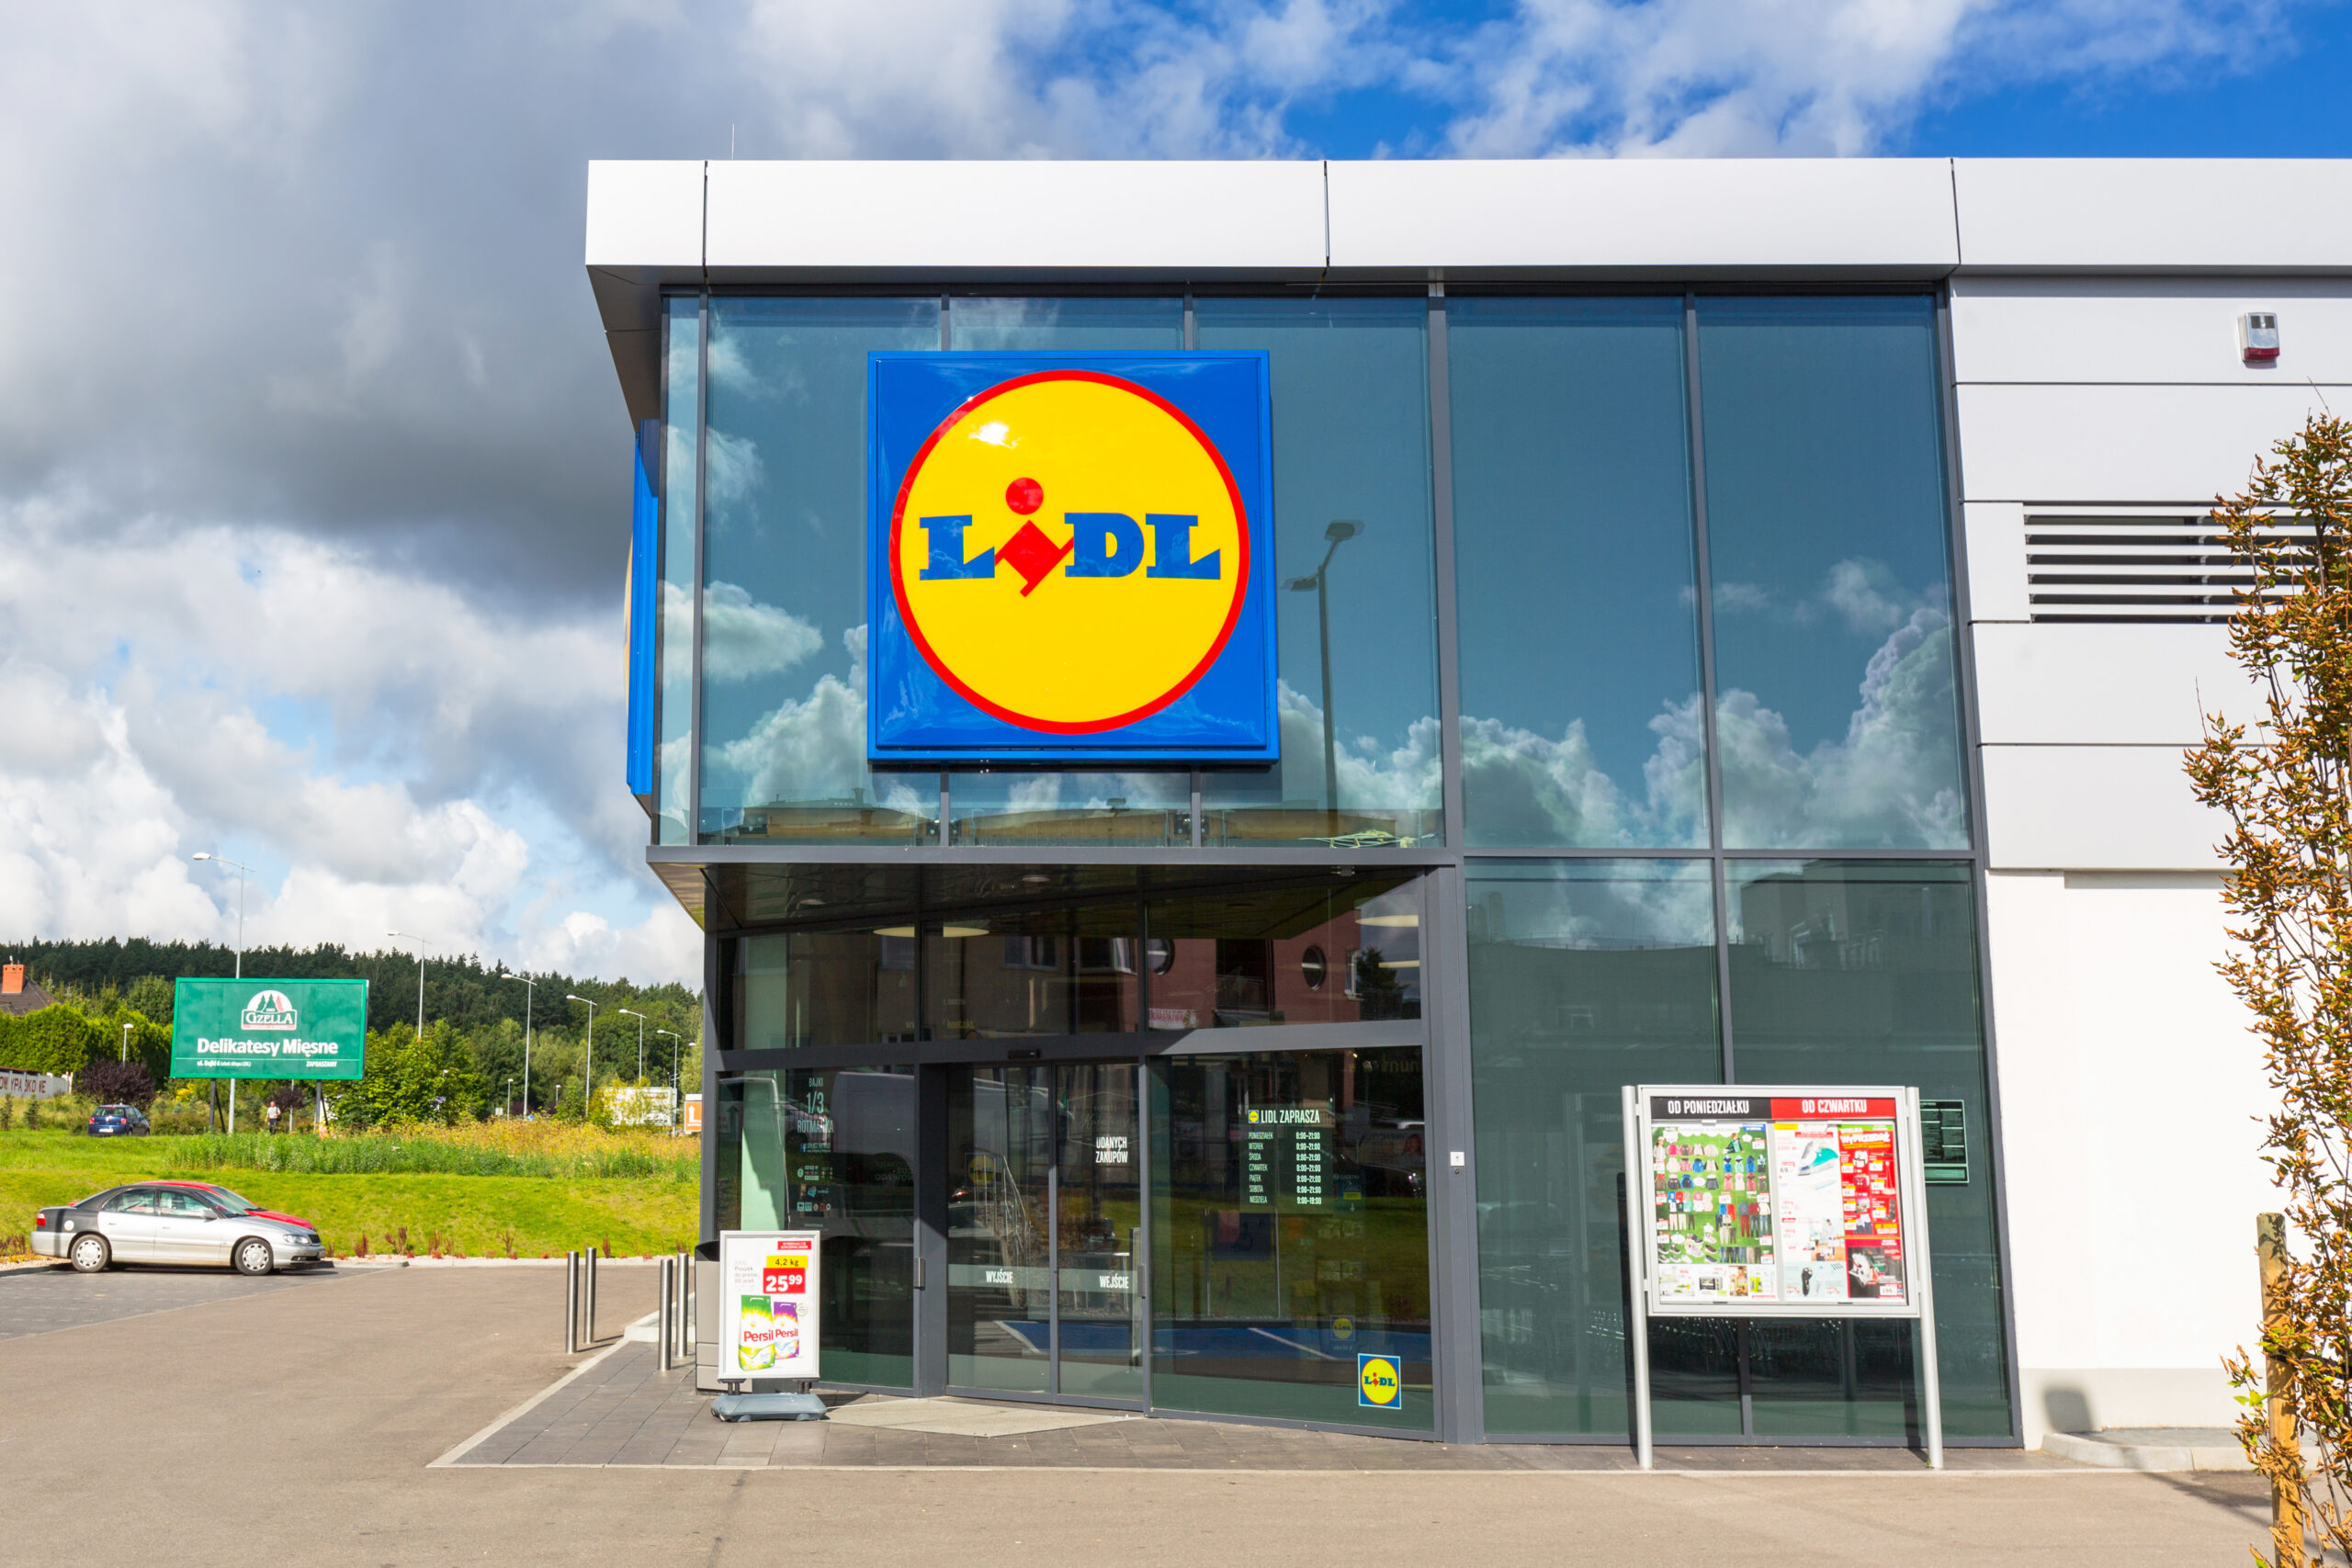 12. Lidl’s Smart Discount System